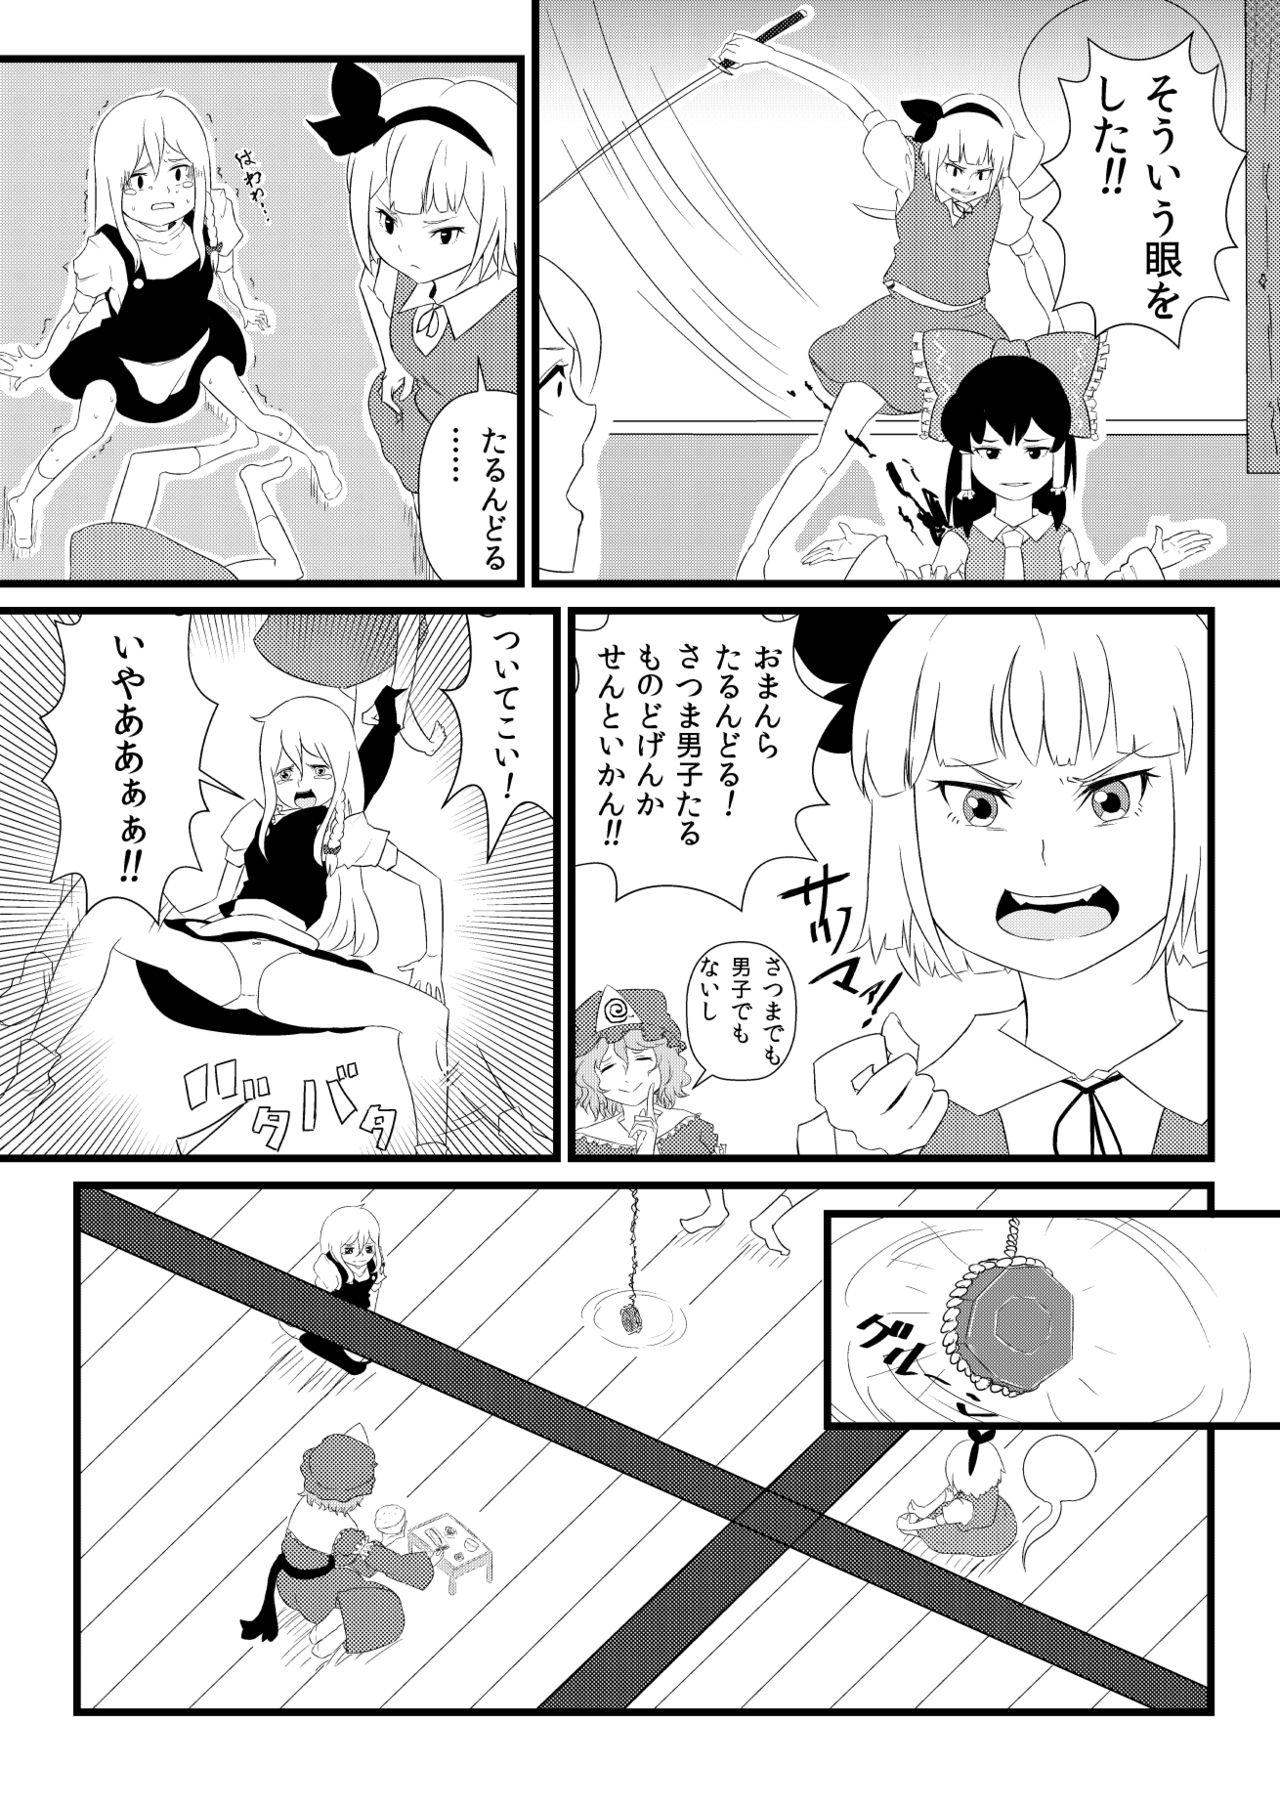 Gays 東方板としあき合同誌5 - Touhou project Short Hair - Page 3